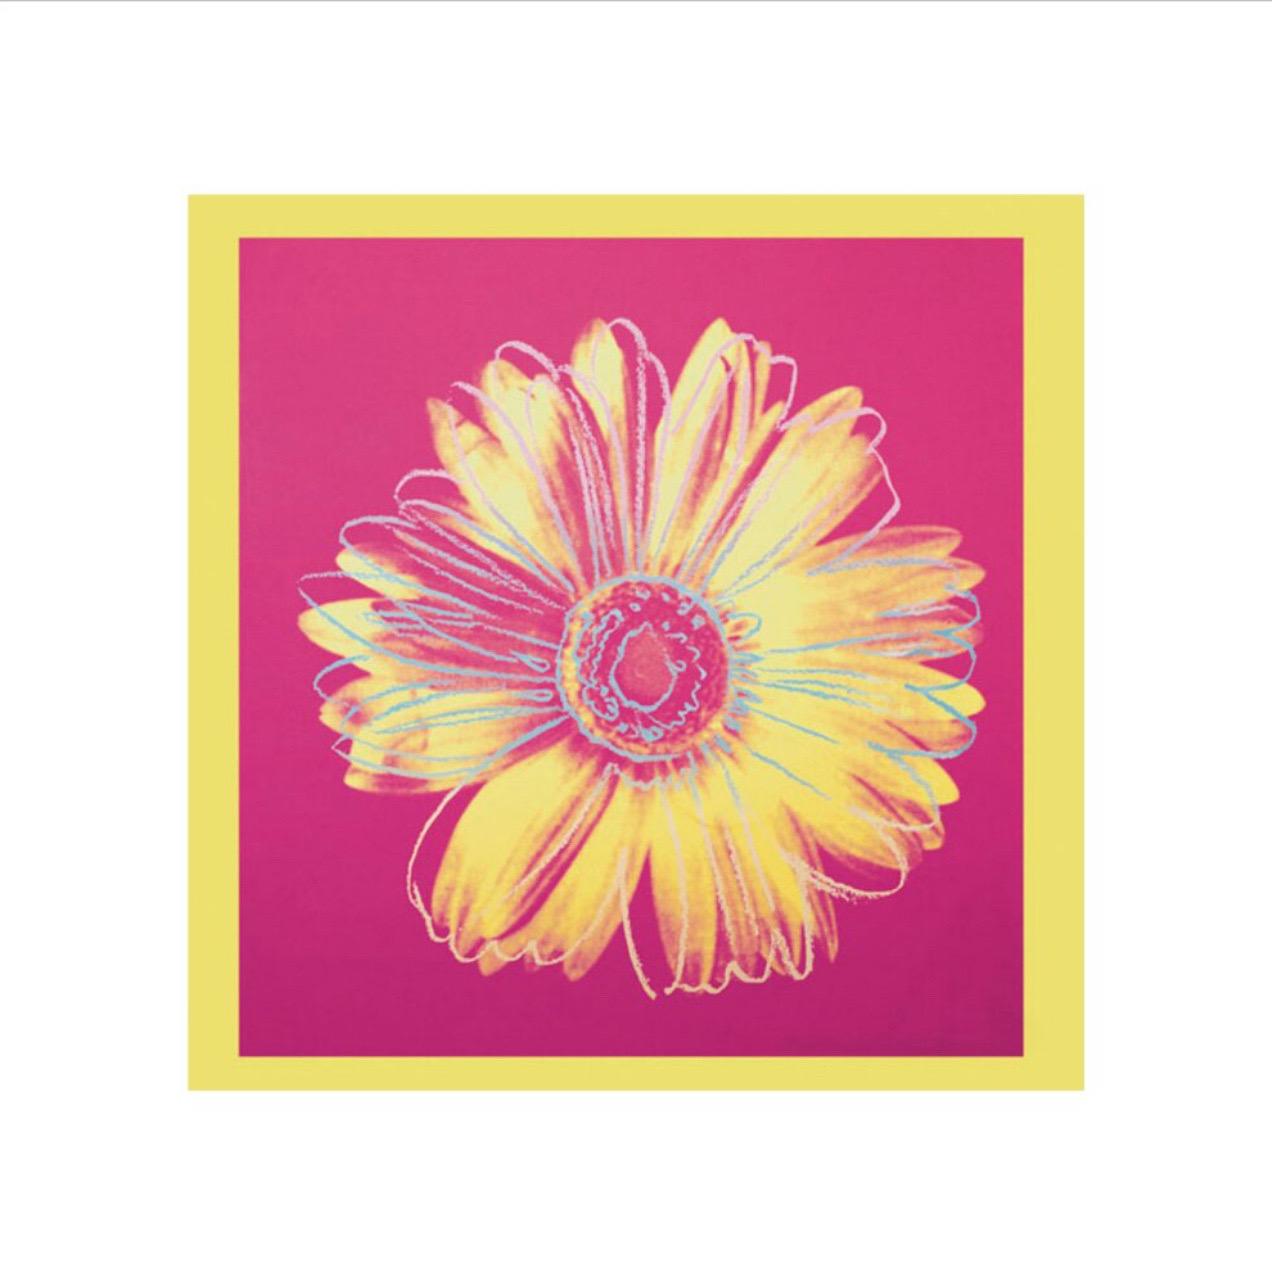 Andy Warhol, Daisy (fuchsia & yellow)

Matt 250gsm conservation digital paper

Image size 35 × 35 cm (13.77 x 13.77 in) 
Paper size 50 x 50 cm (19.68 x 19.68 in) 

Throughout Andy Warhol’s career, he often returned to subjects that interested him.